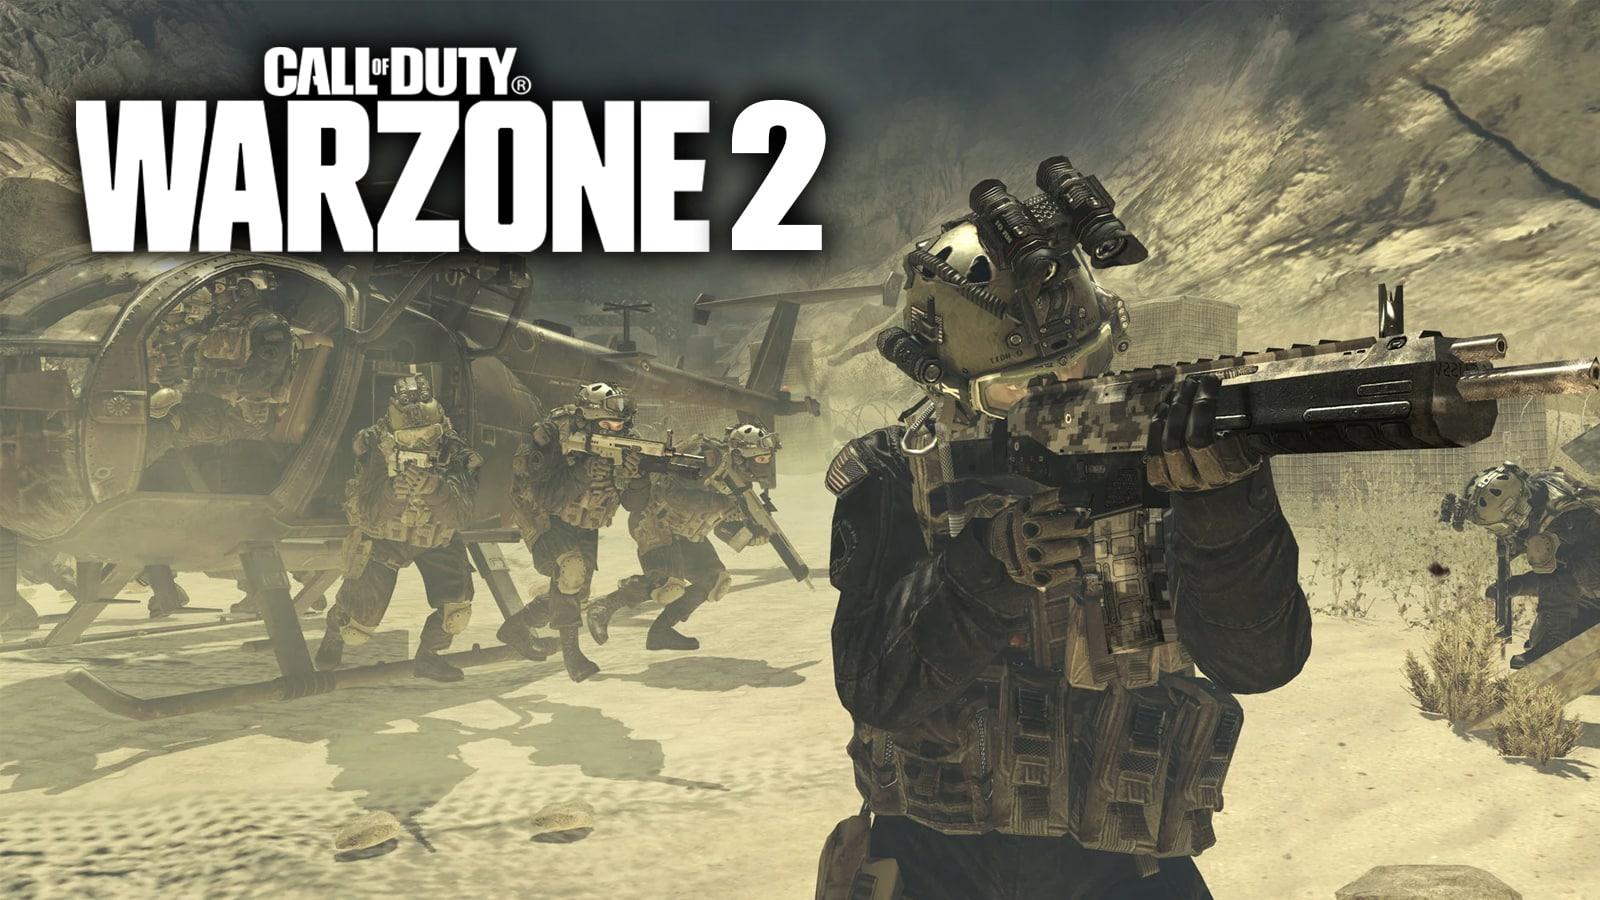 A concept image of Warzone 2